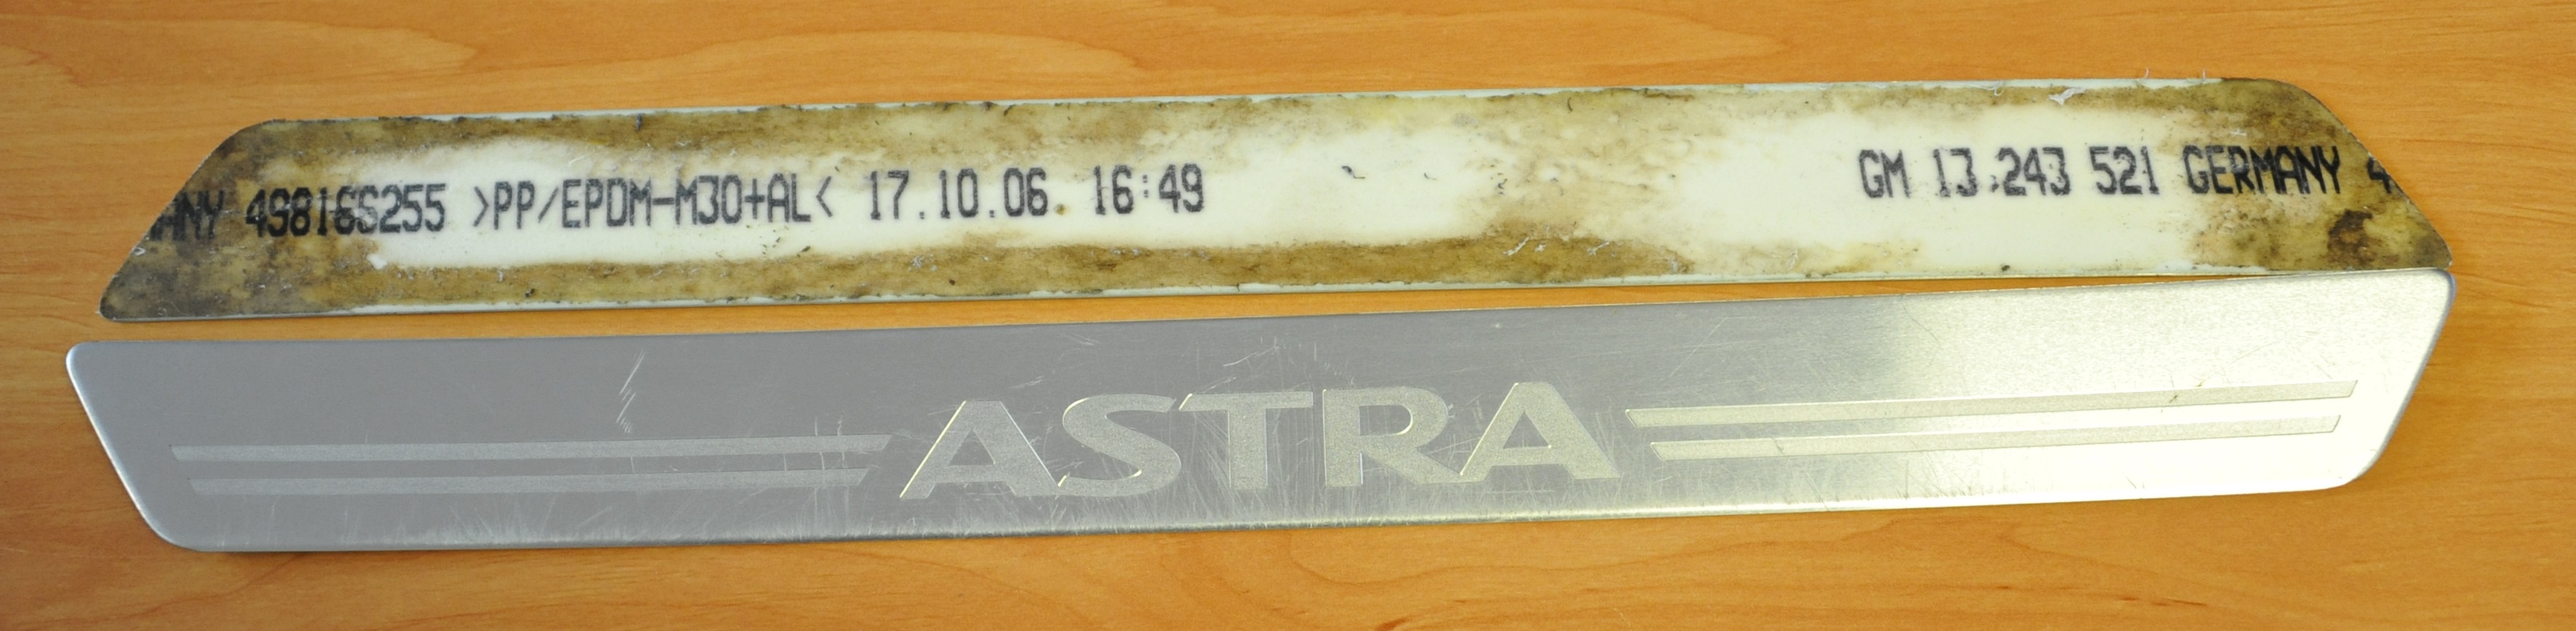 13243521, Nameplate, astra GM part